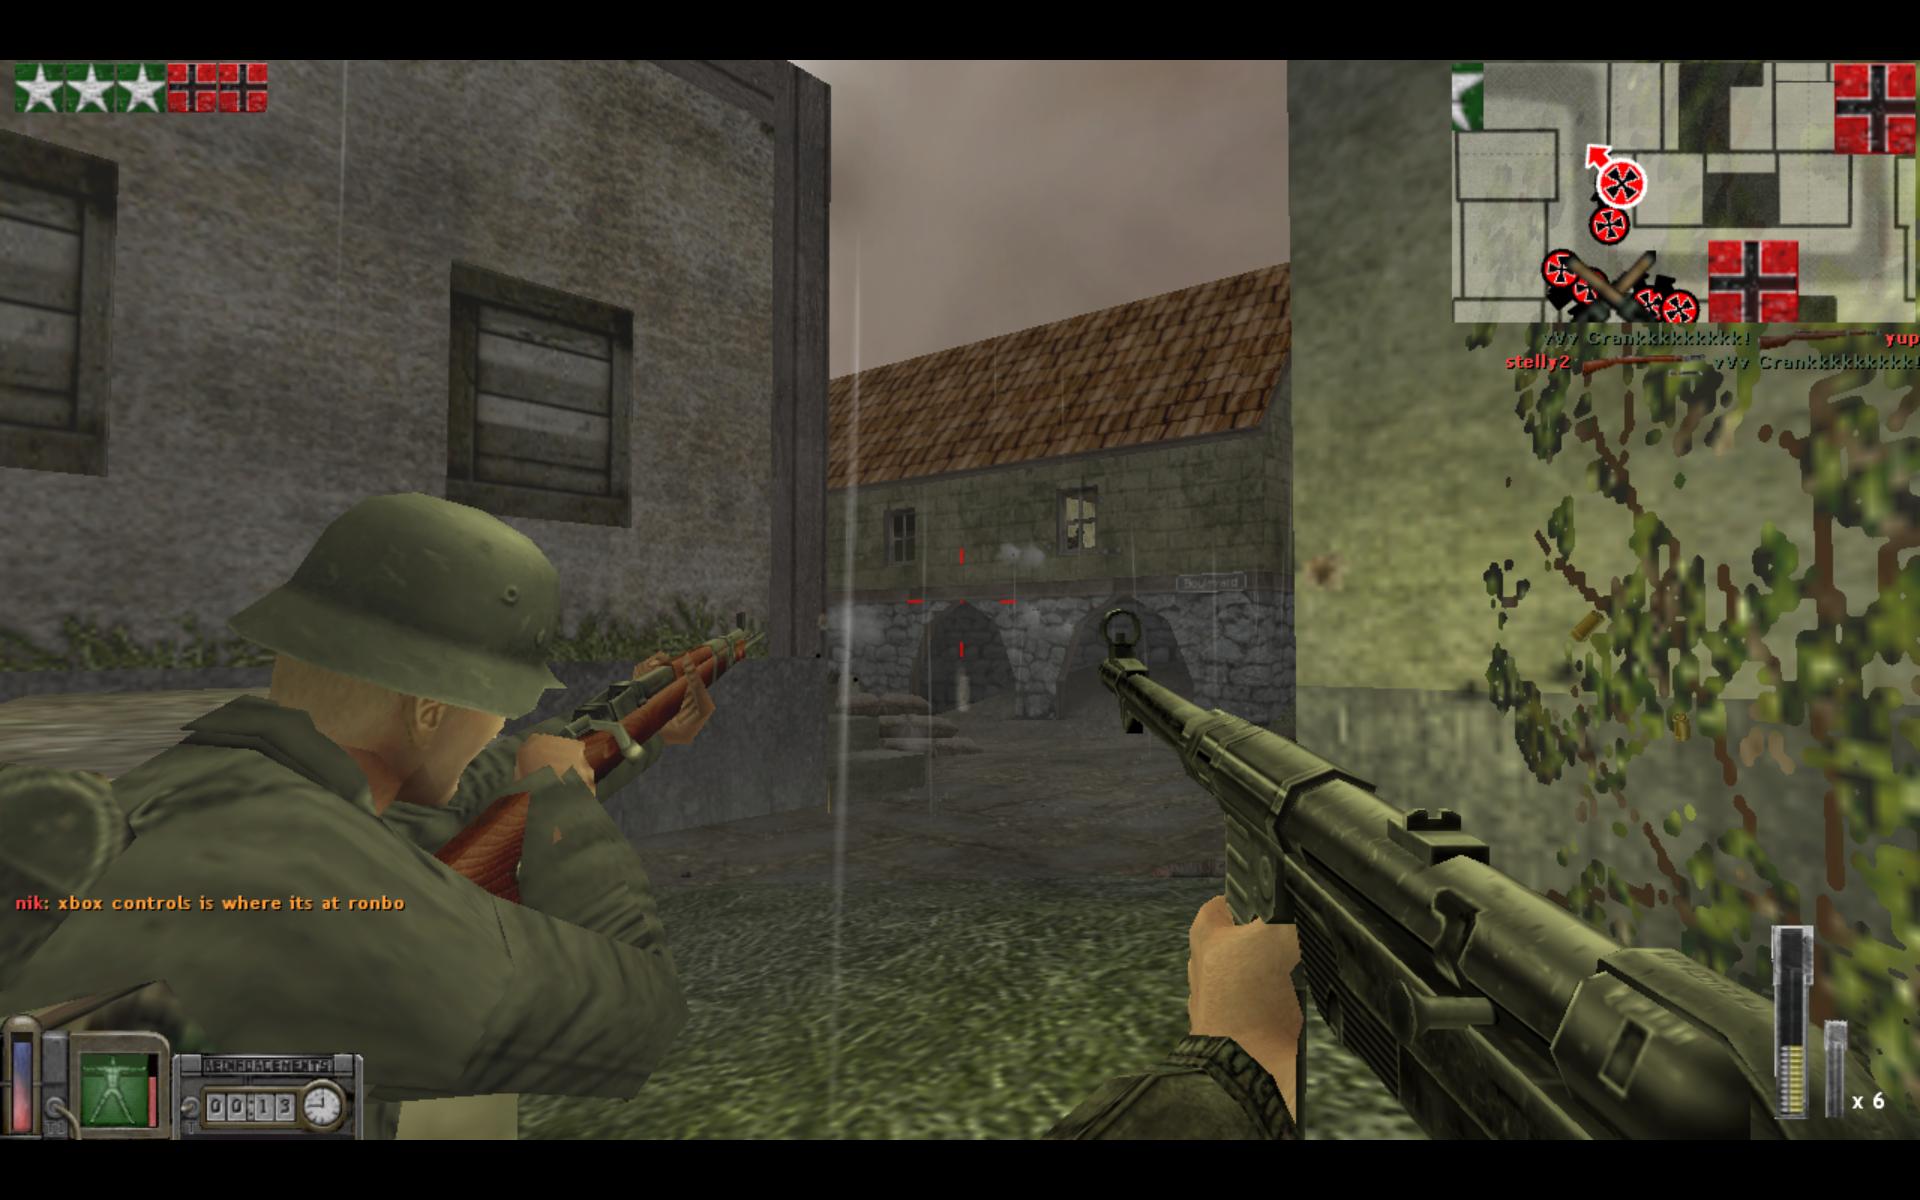 This is one of the first PC shooters I've played. I can't go back to it with ease because the control scheme is drastically different from most common FPS's these days.